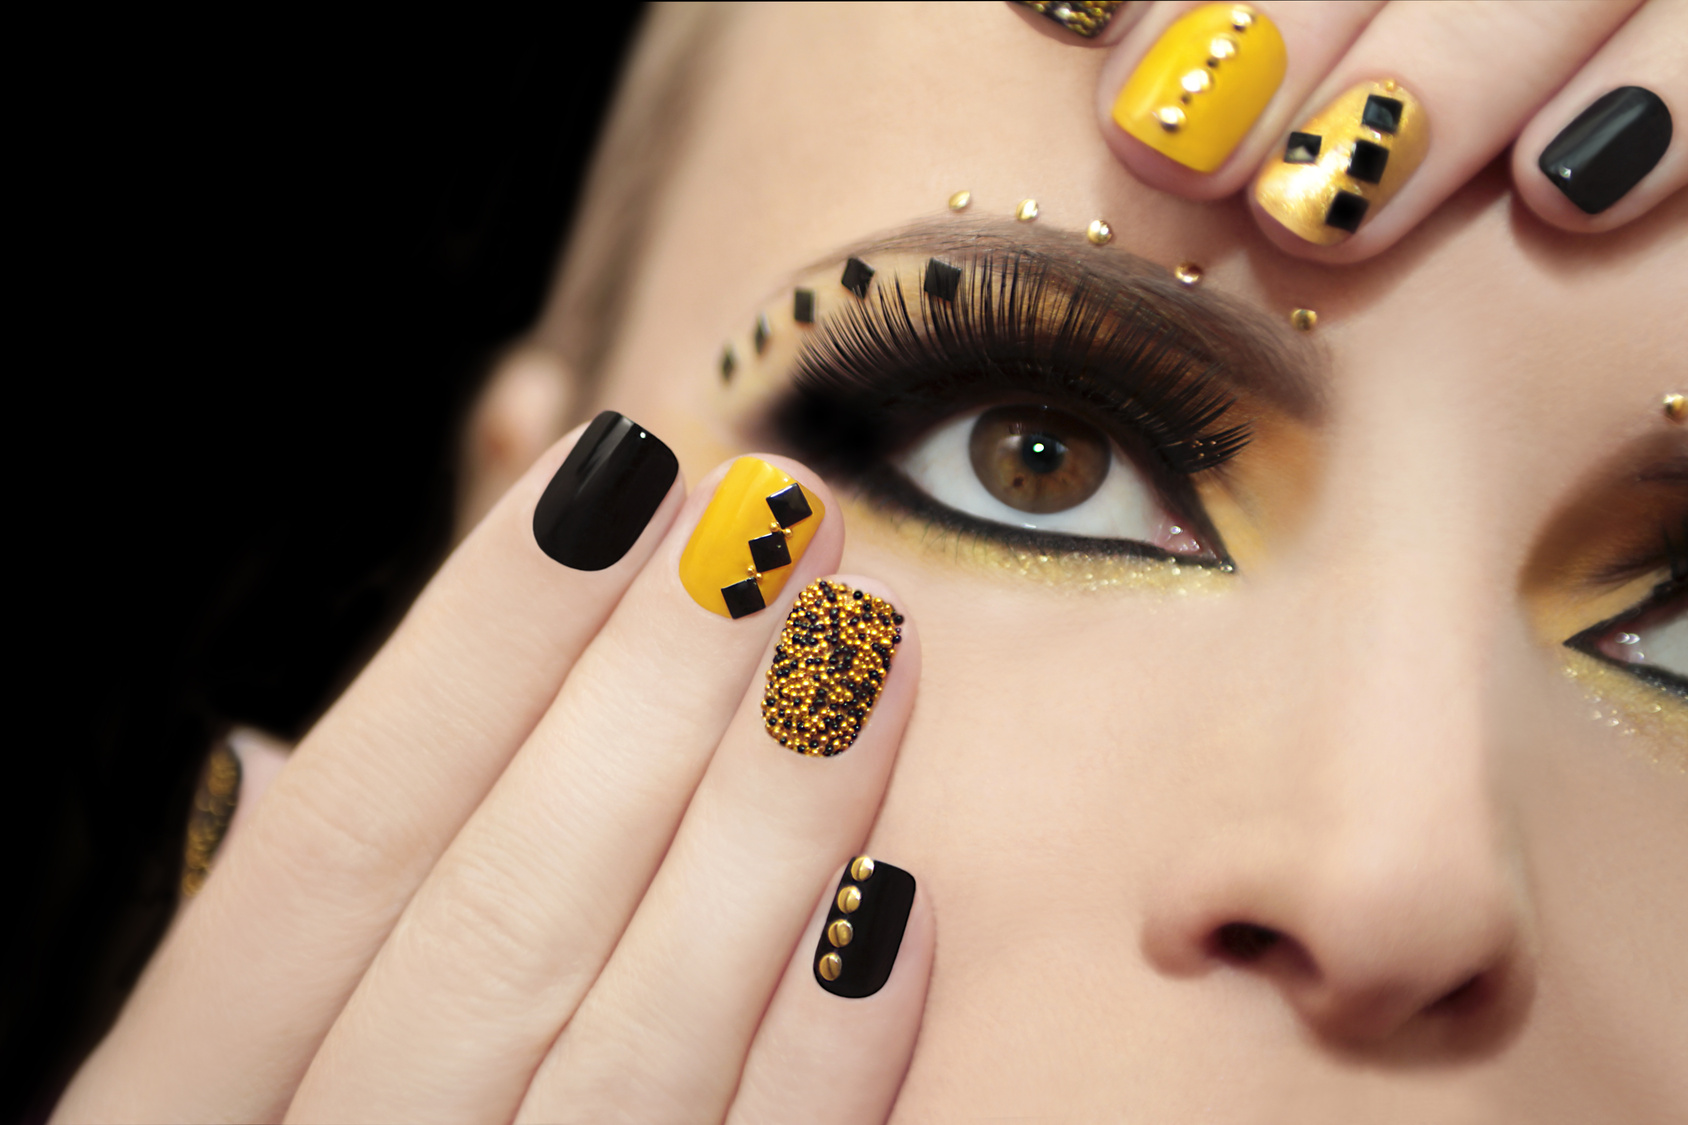 Nail Art, or the art of decorating your nails